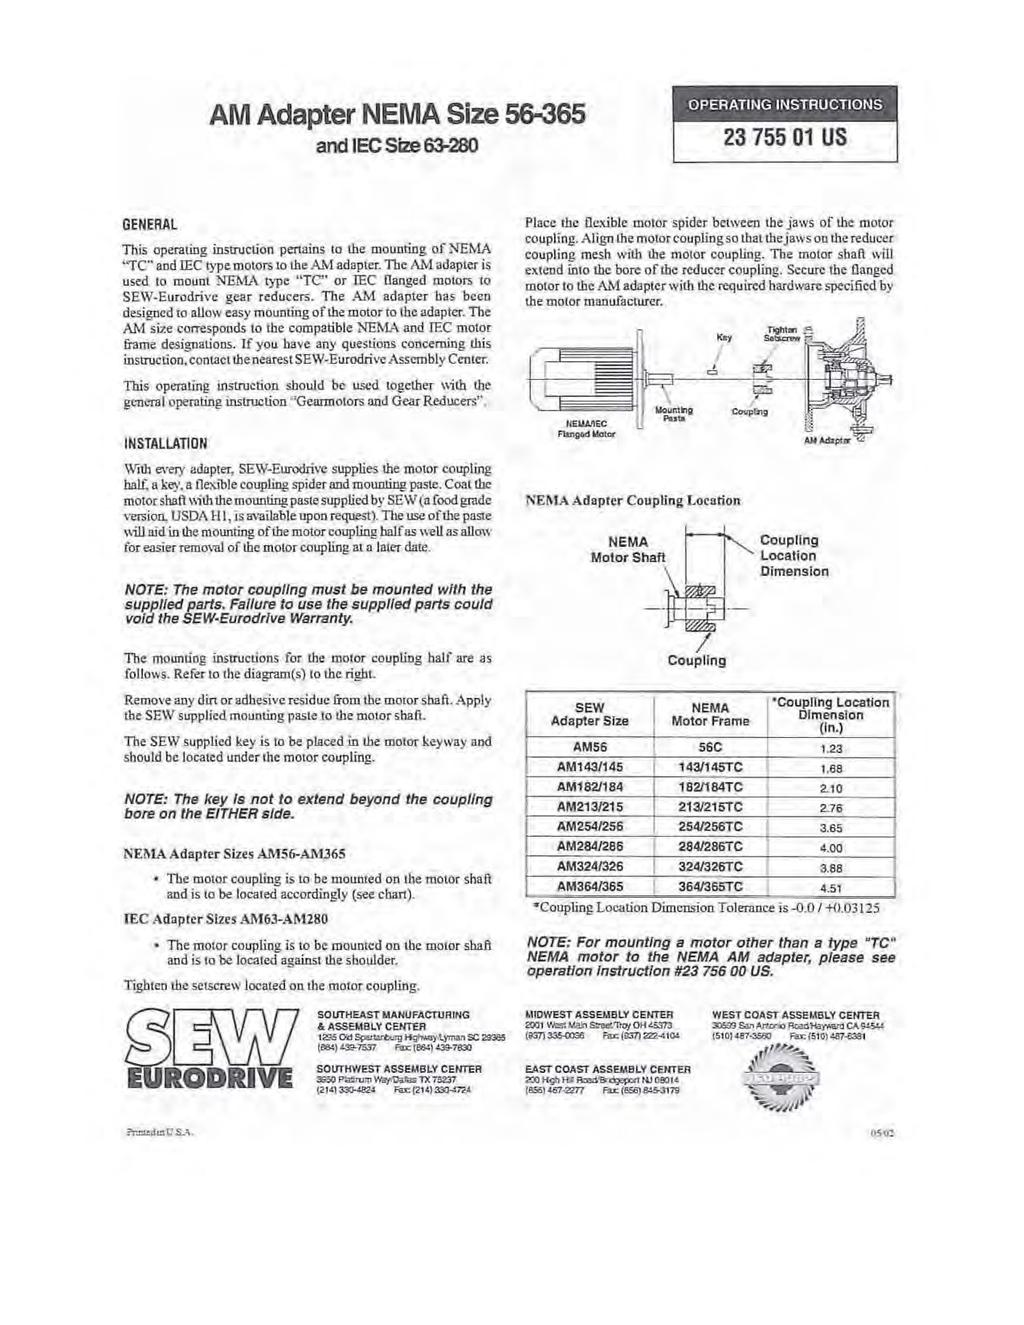 AM Adapter NEMA Size 56-365 and lee Size 63-280 GENERAL This operating Instruction pertains to the mounting or NEMA '"TC"lInd lee type motors to the A.M udopter. The A- adapter is used \0 molln!